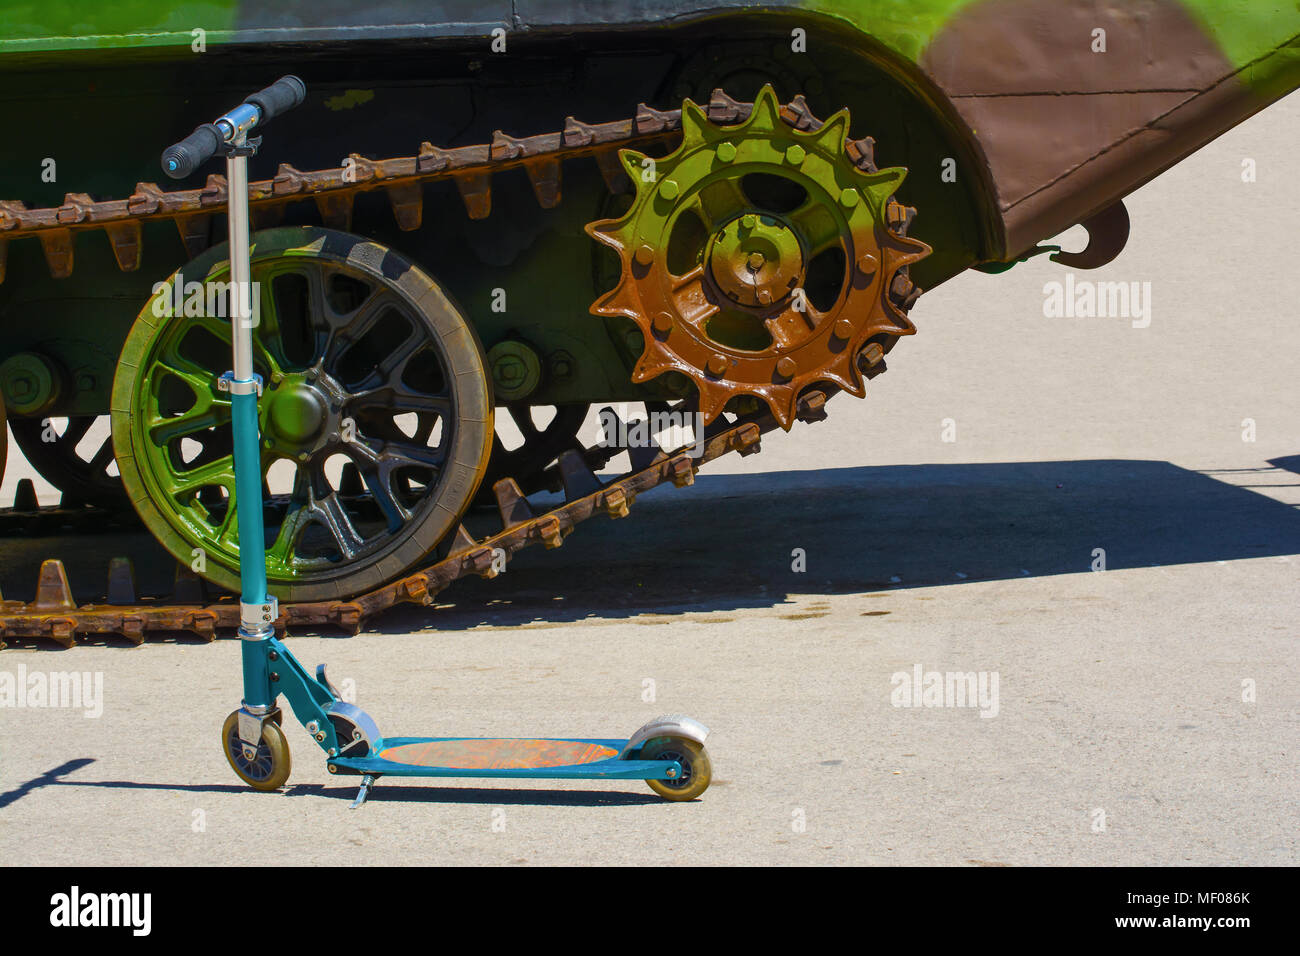 Kids’ scooter in front of a part of a caterpillar track on a military amphibious vehicle. The vehicle has a verdant camouflage scheme on it. Stock Photo